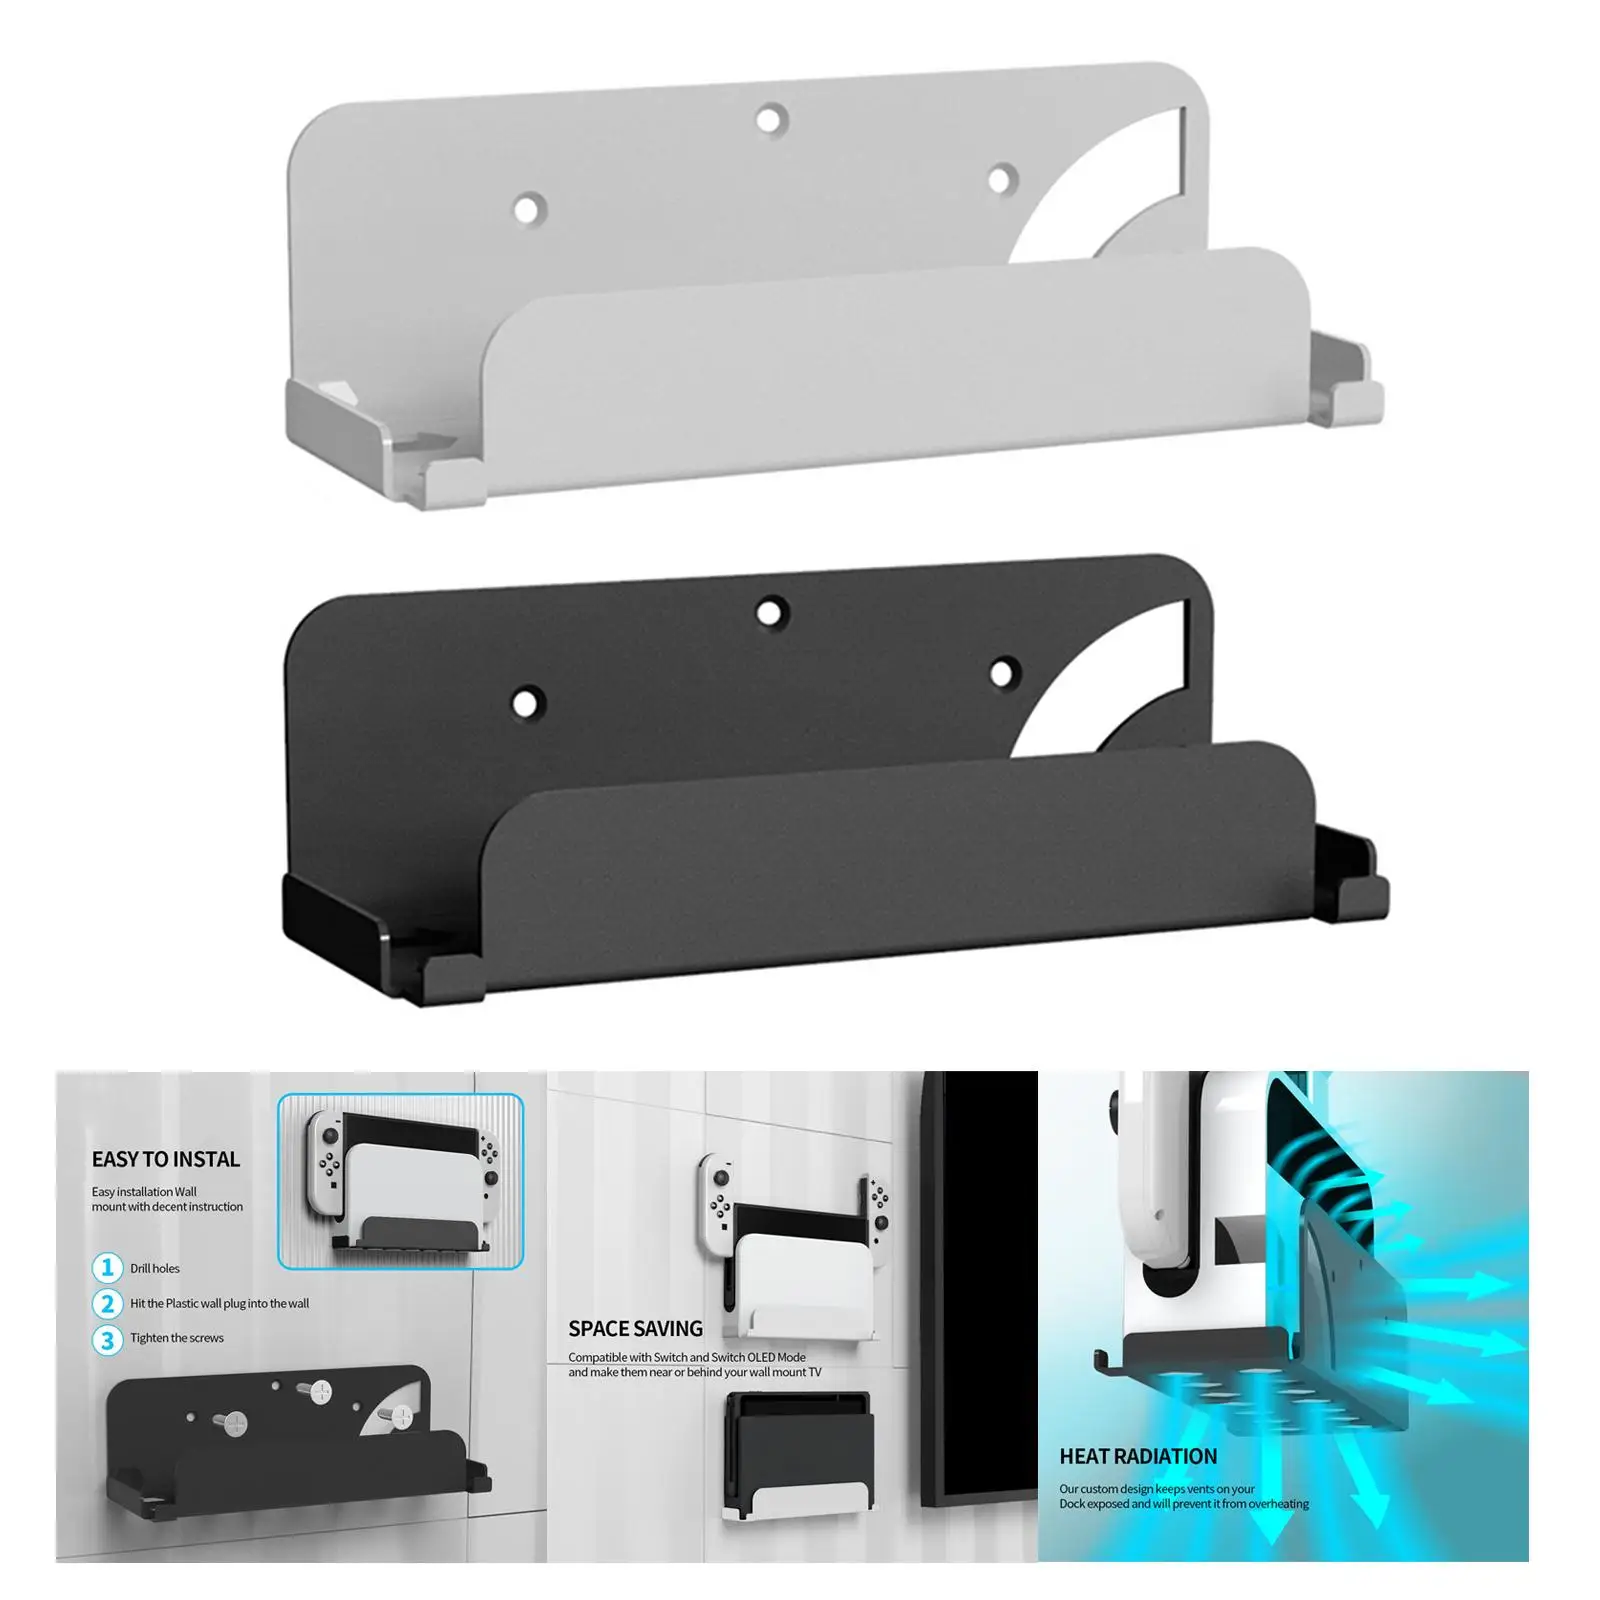 Universal Game Console Wall Mounted Holder Bracket Solid for Storage Holder Mobile Phone